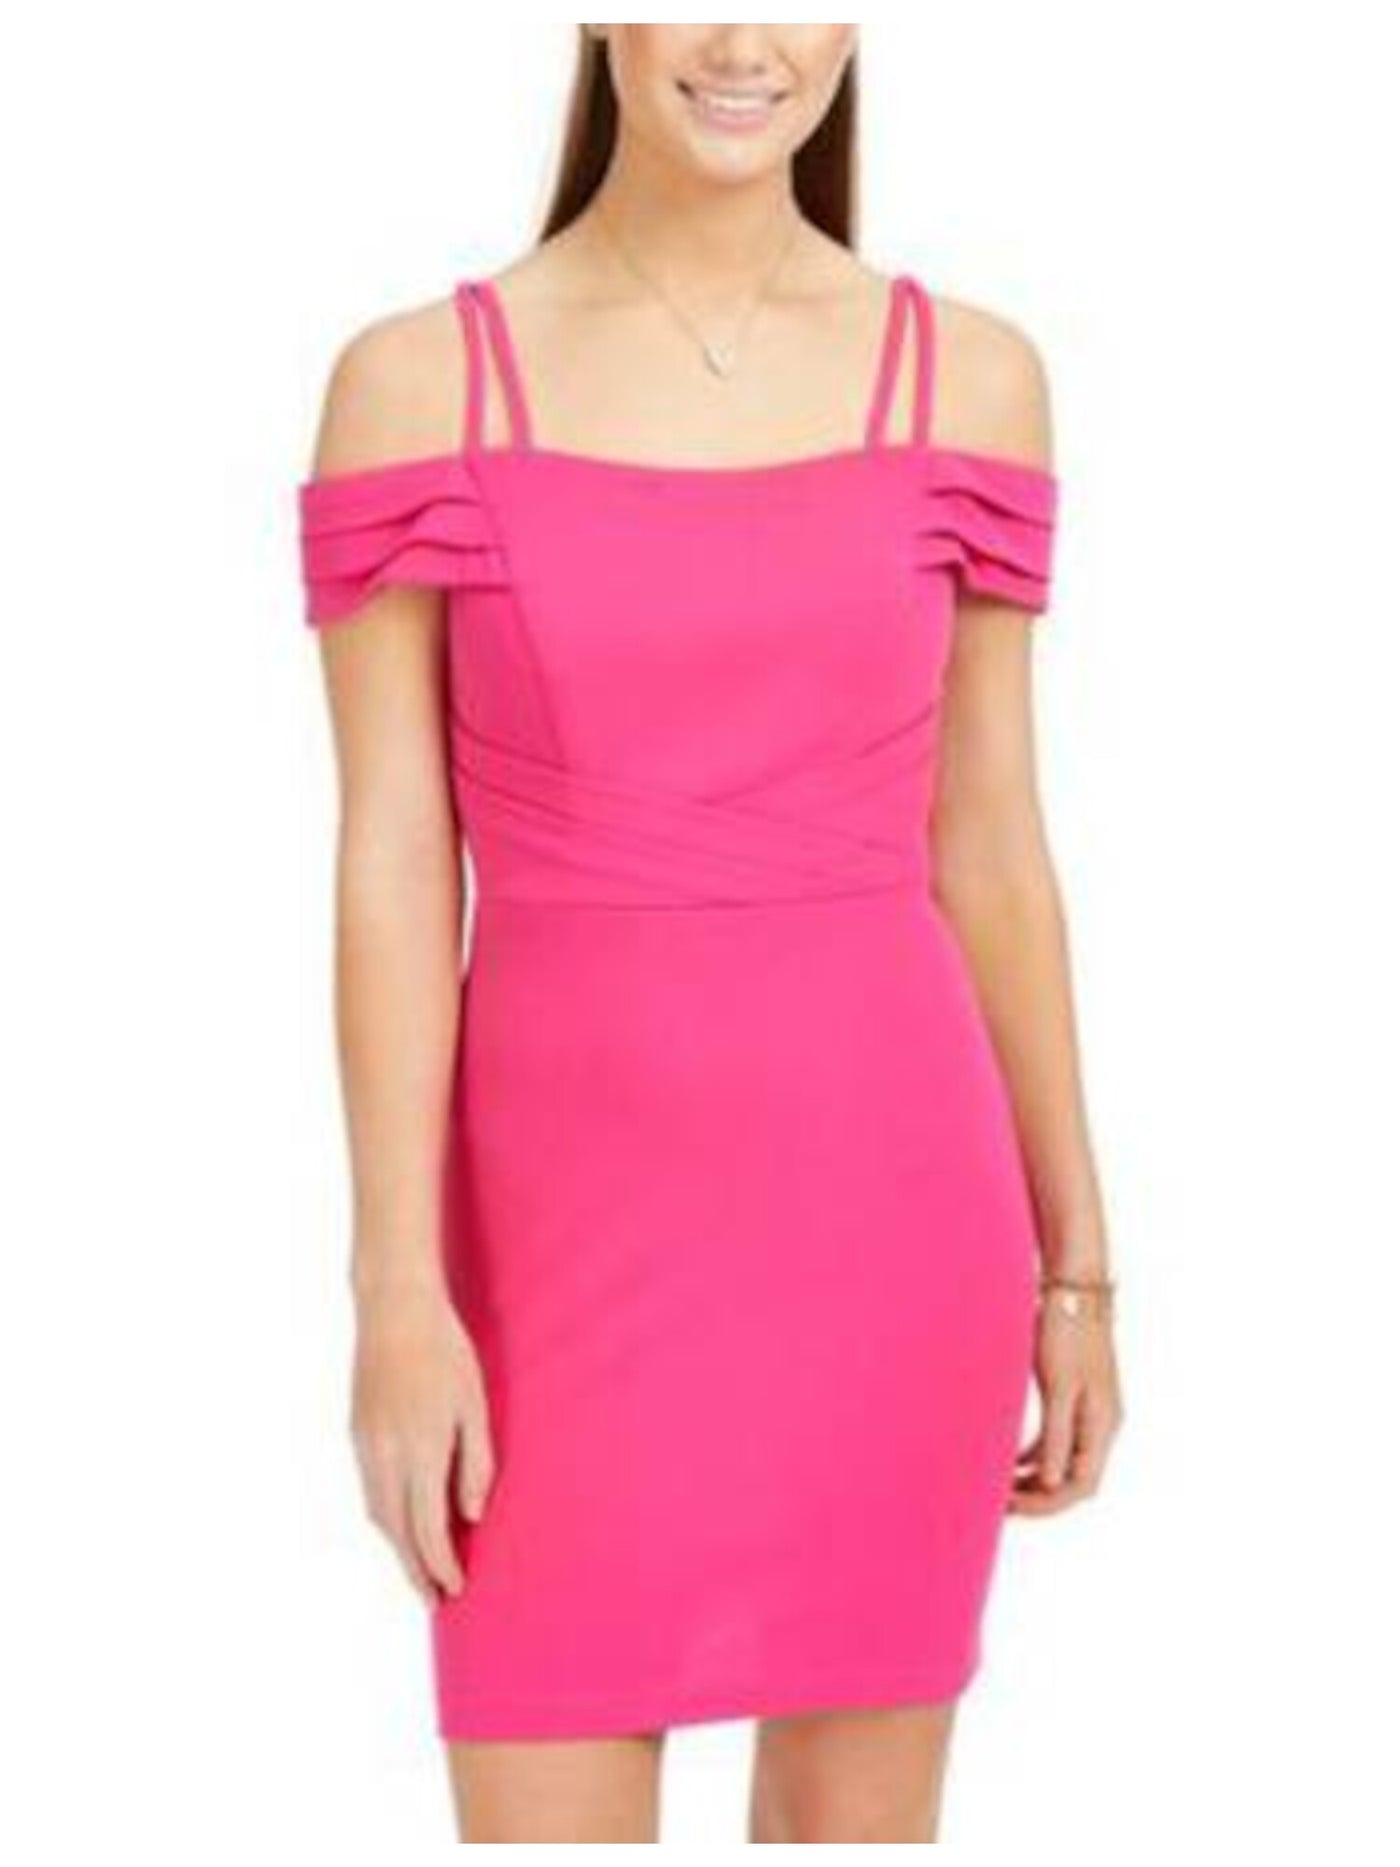 TEEZE ME Womens Pink Cold Shoulder Spaghetti Strap Short Evening Body Con Dress Juniors 5\6